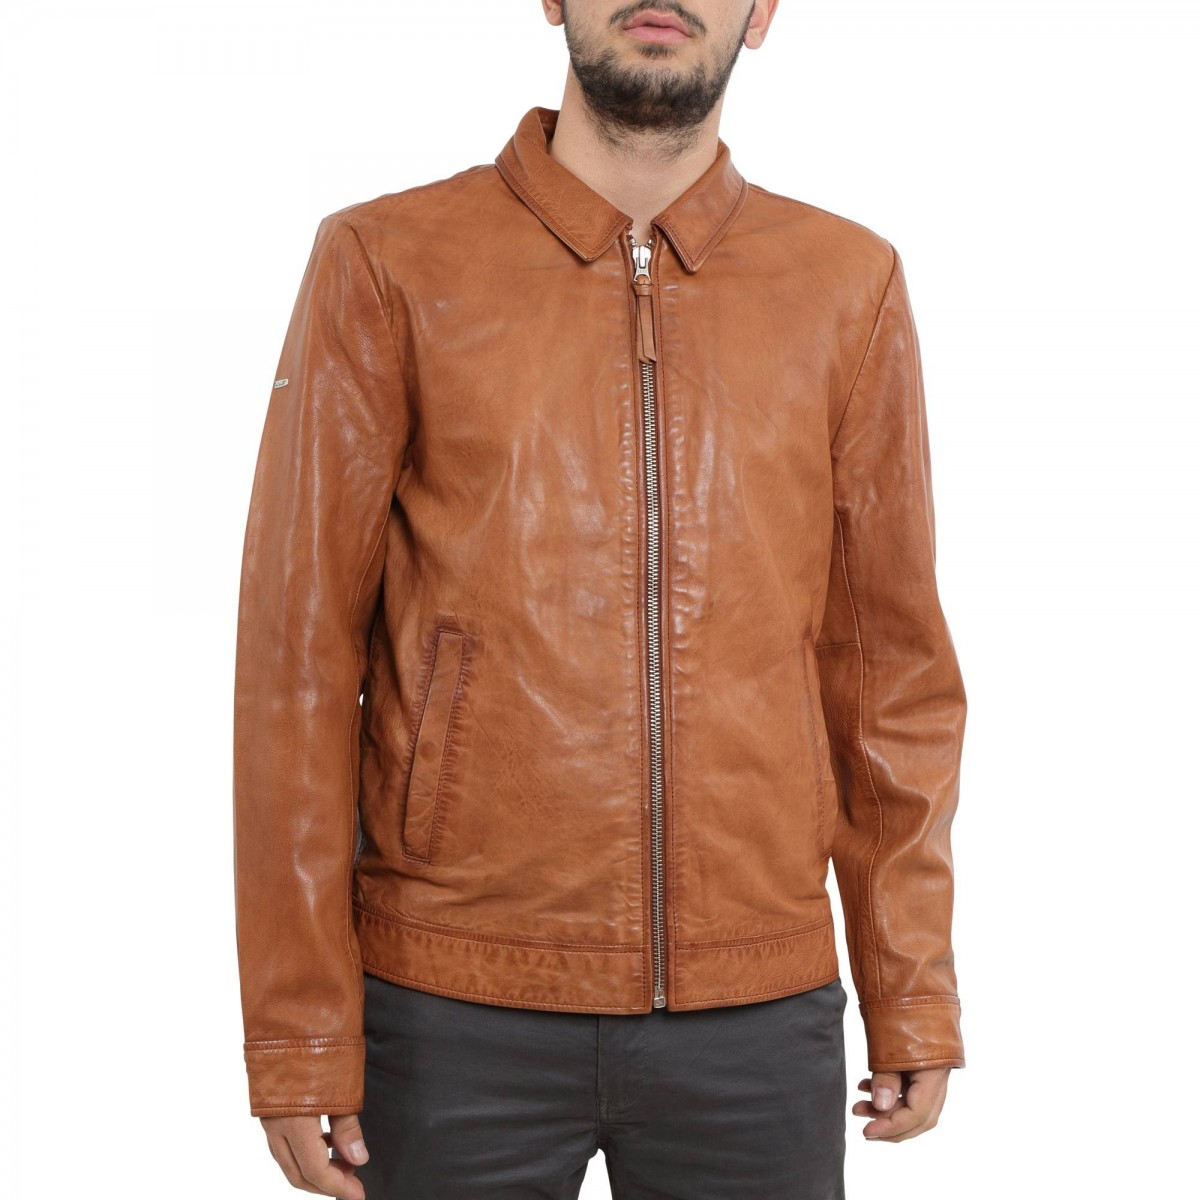 INDIE COACH LEATHER JACKET